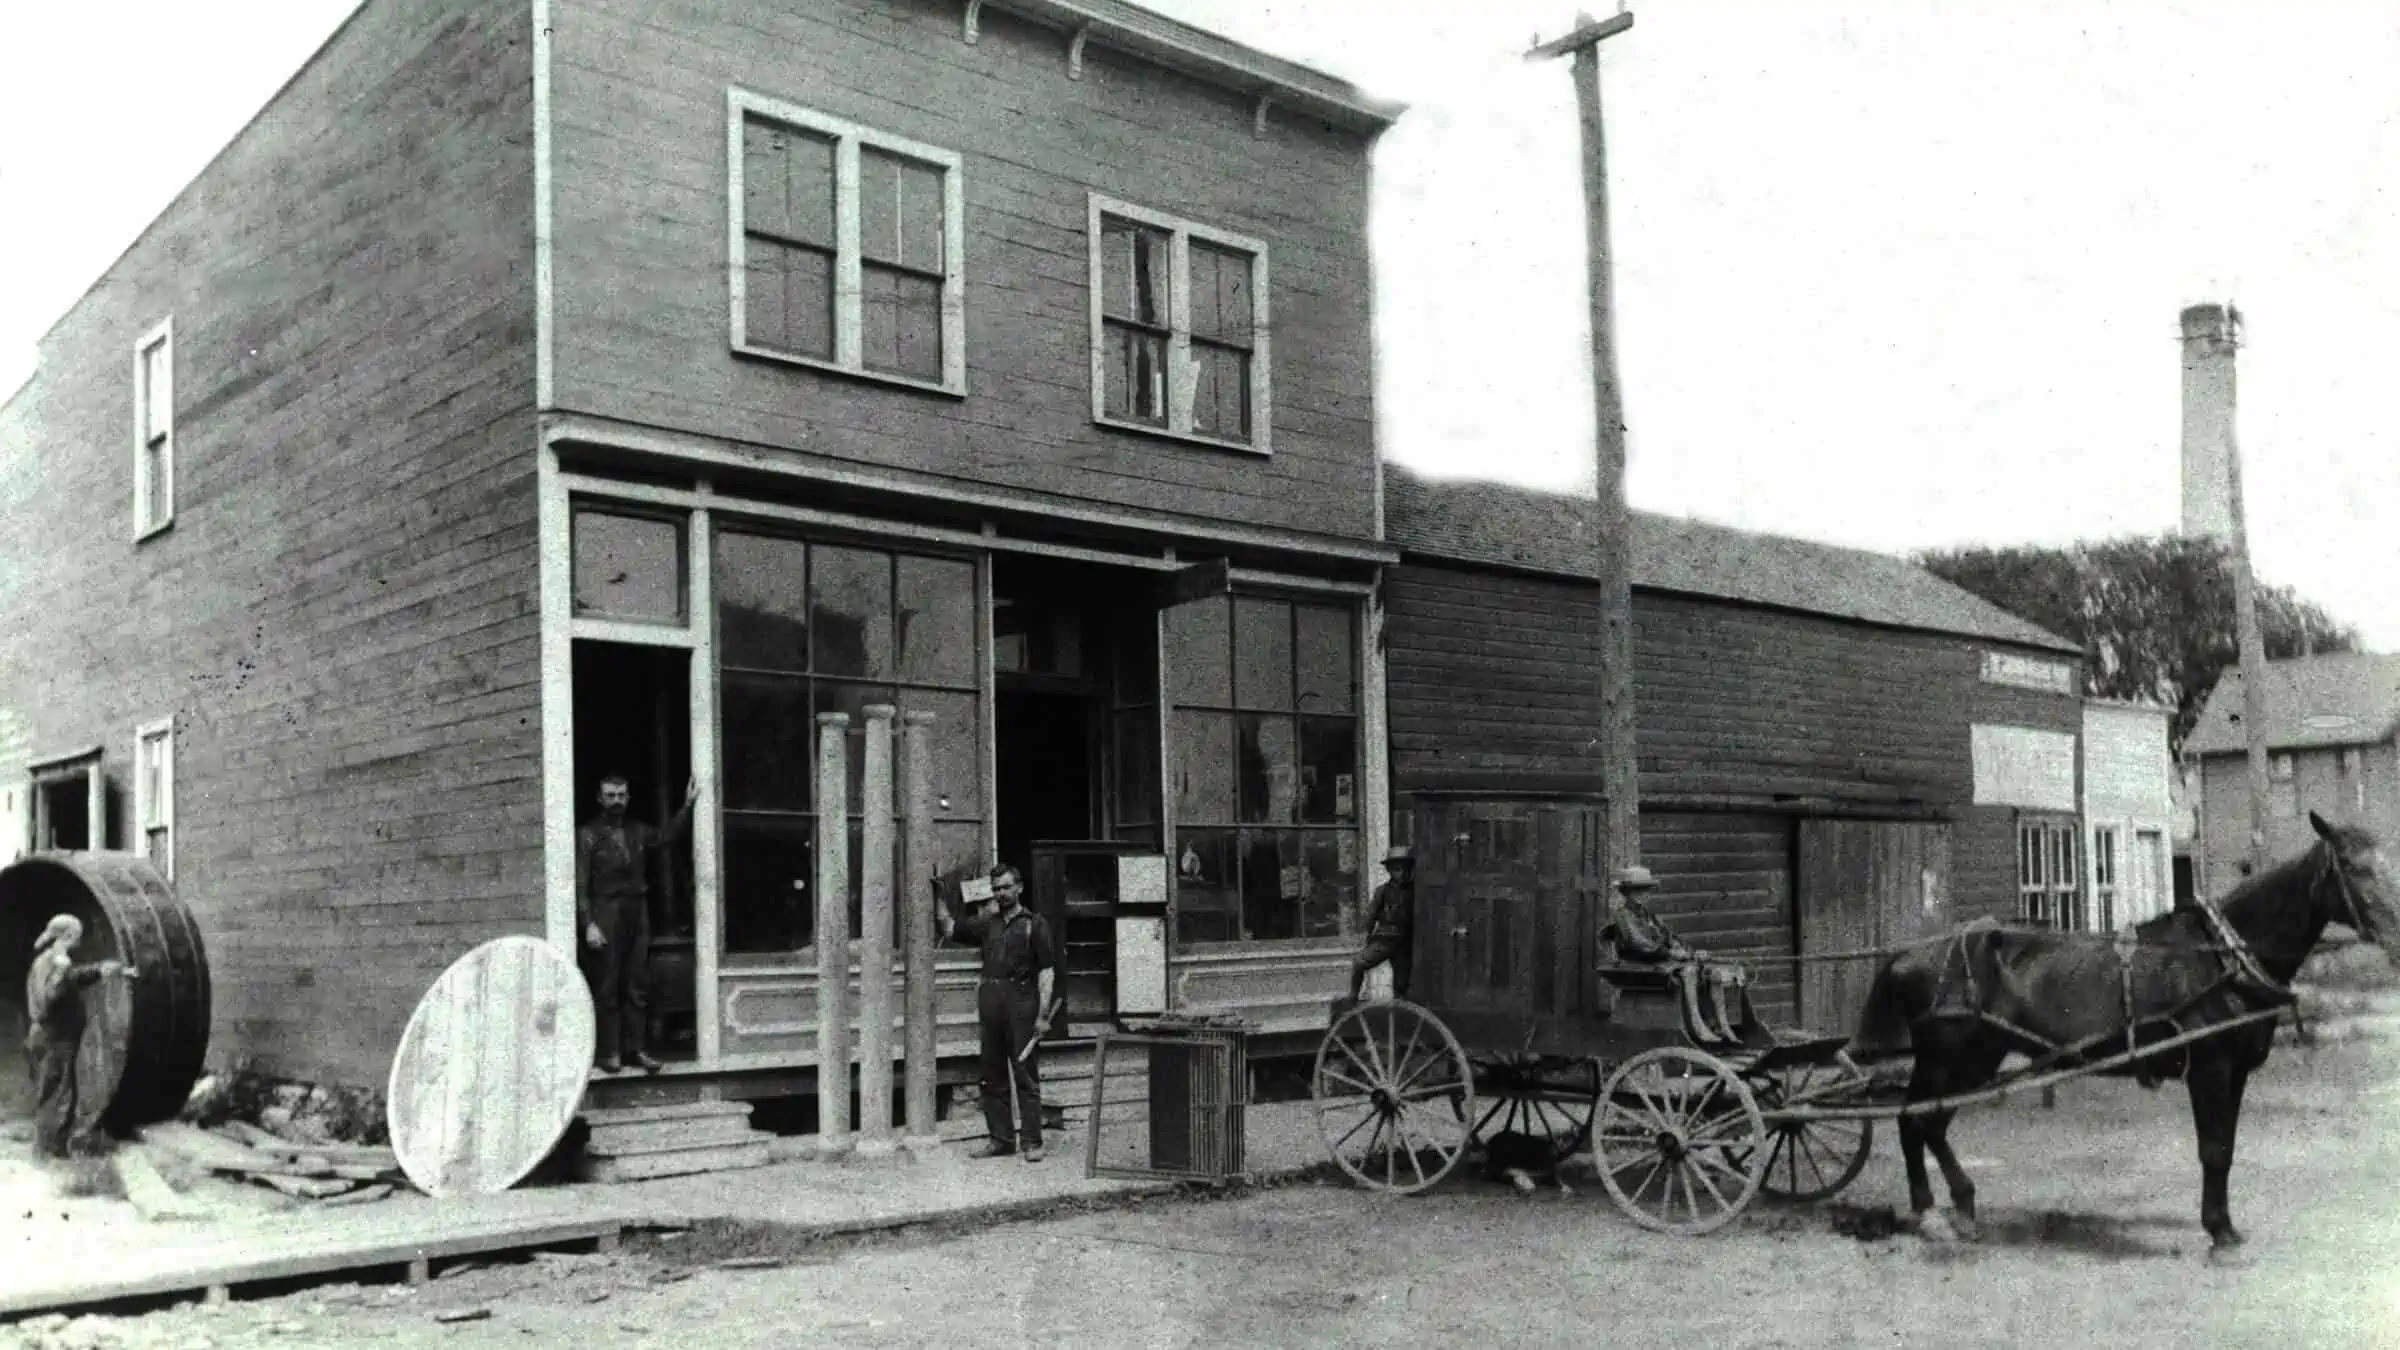 Black and white photo of horse-drawn carriage in front of woodworking shop